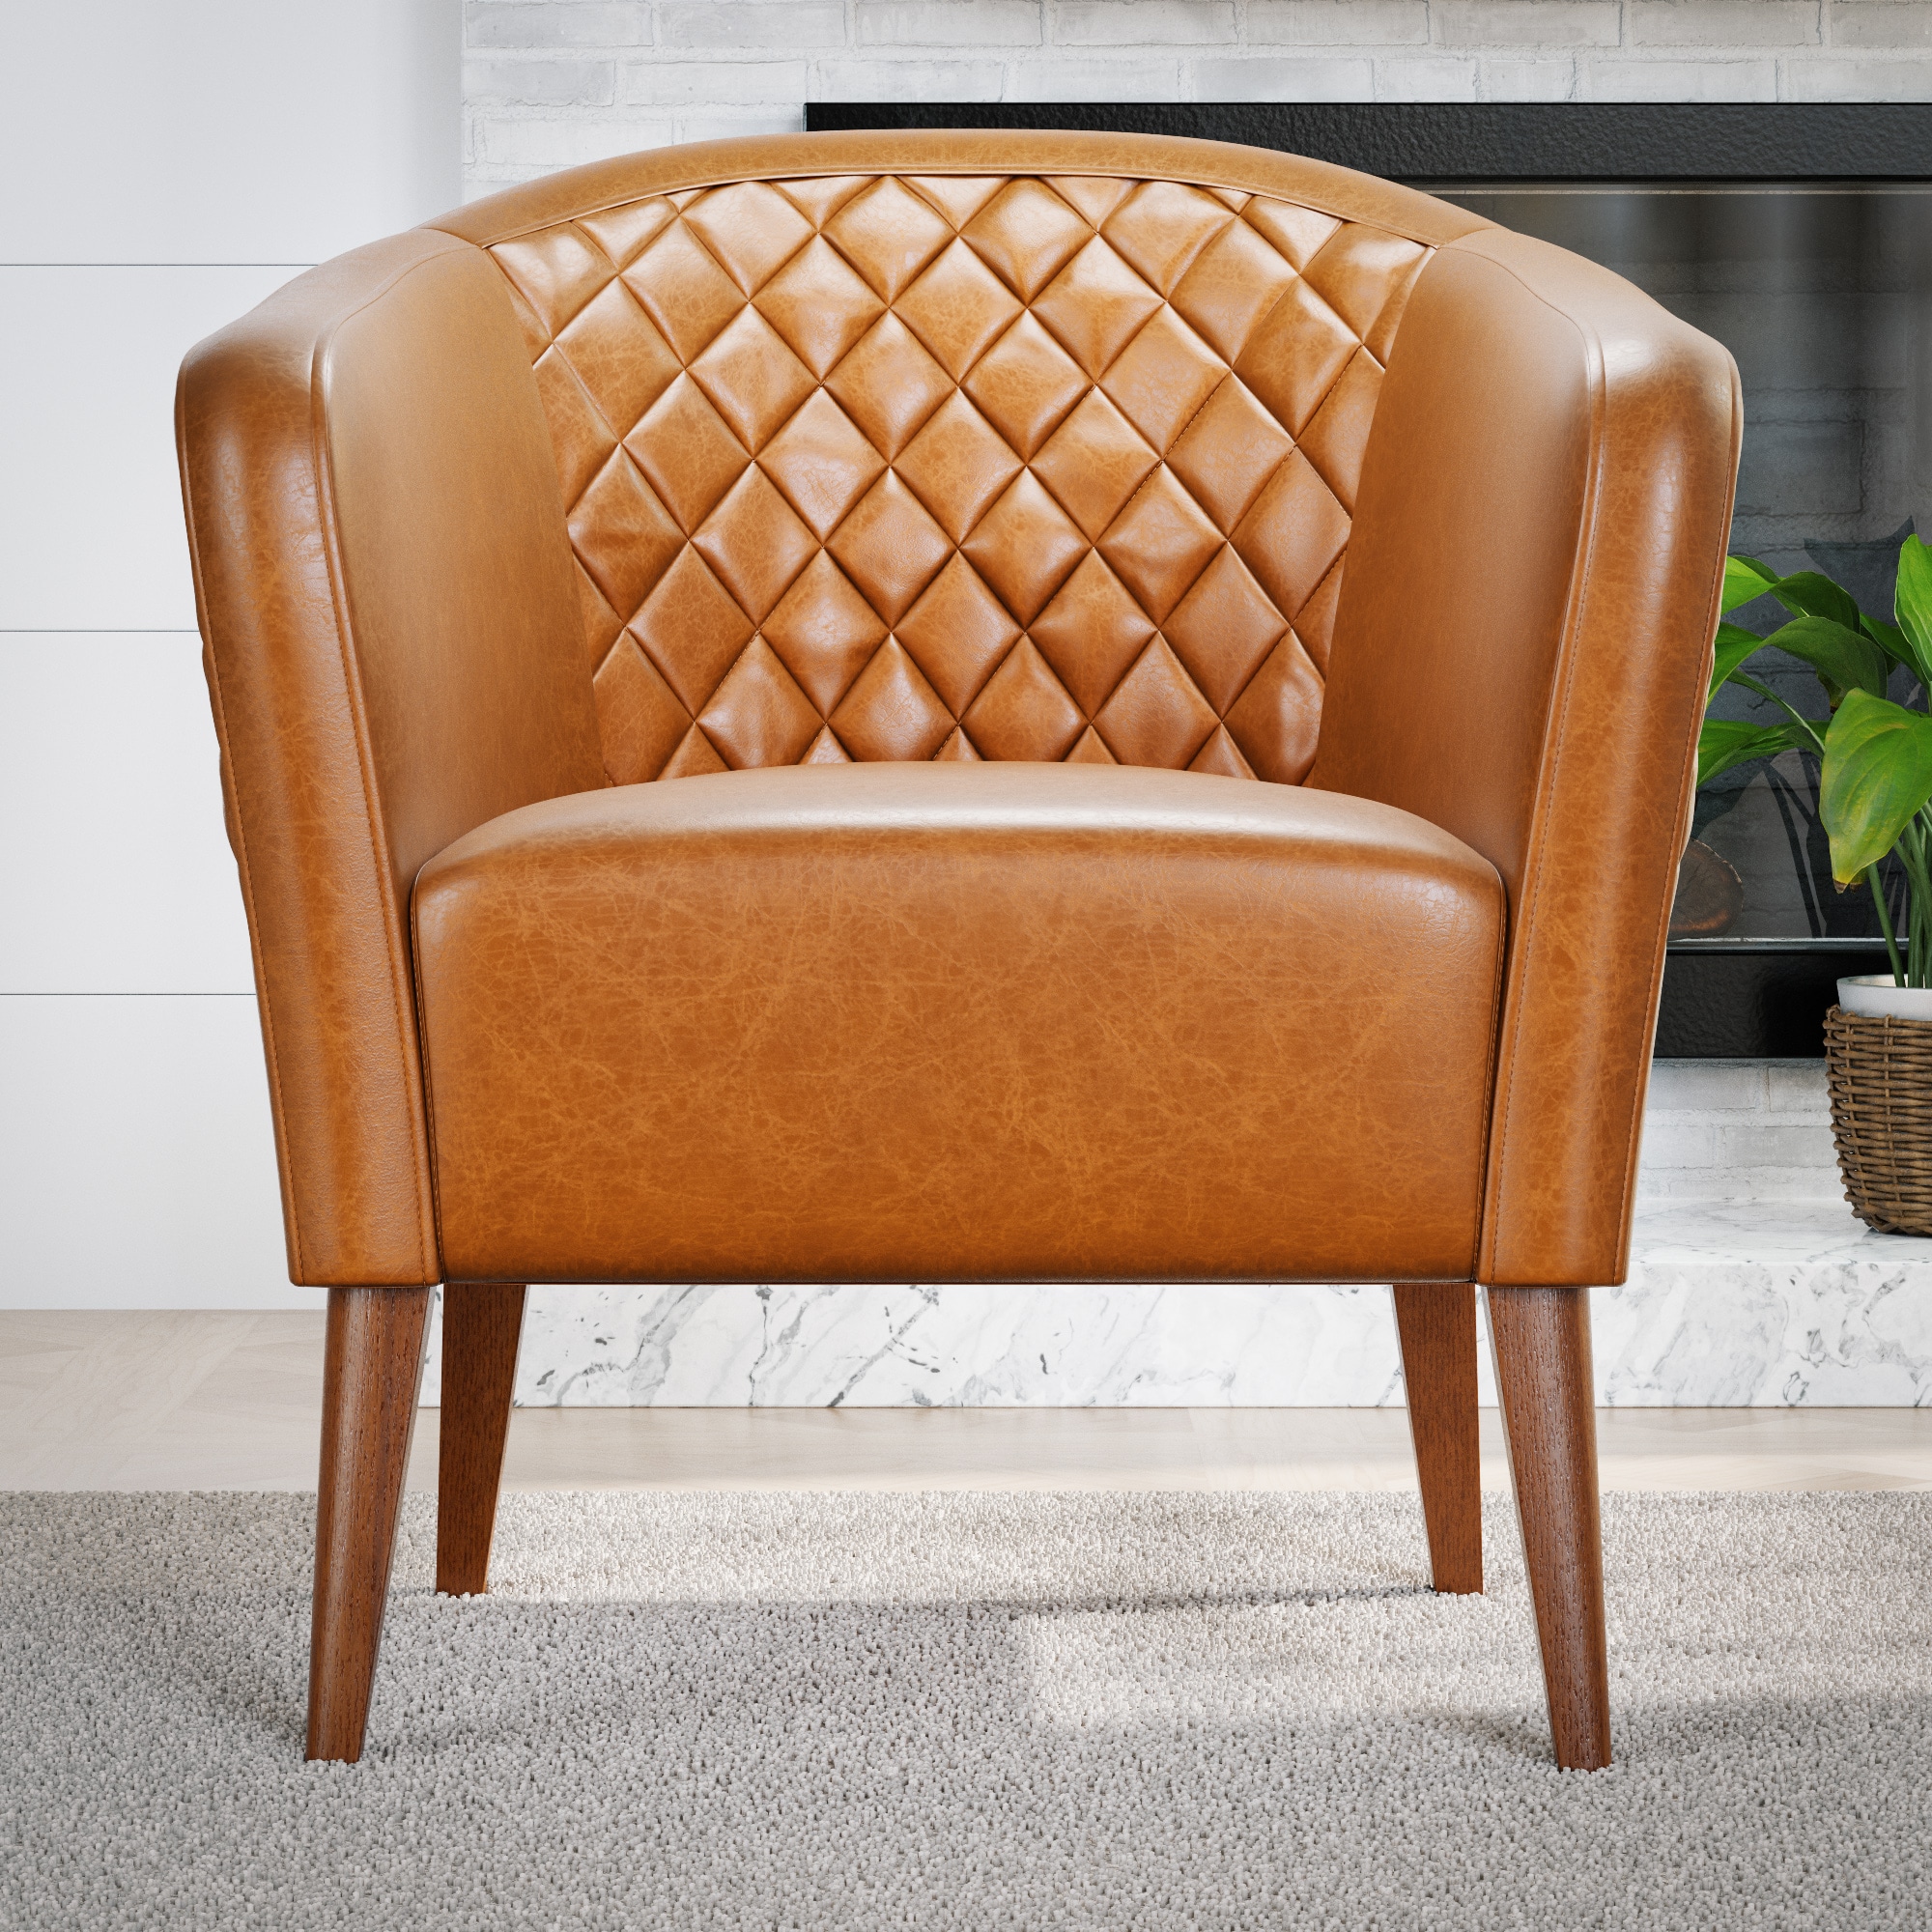 Camel Faux Leather Accent Chair, Brown Leather Barrel Chair